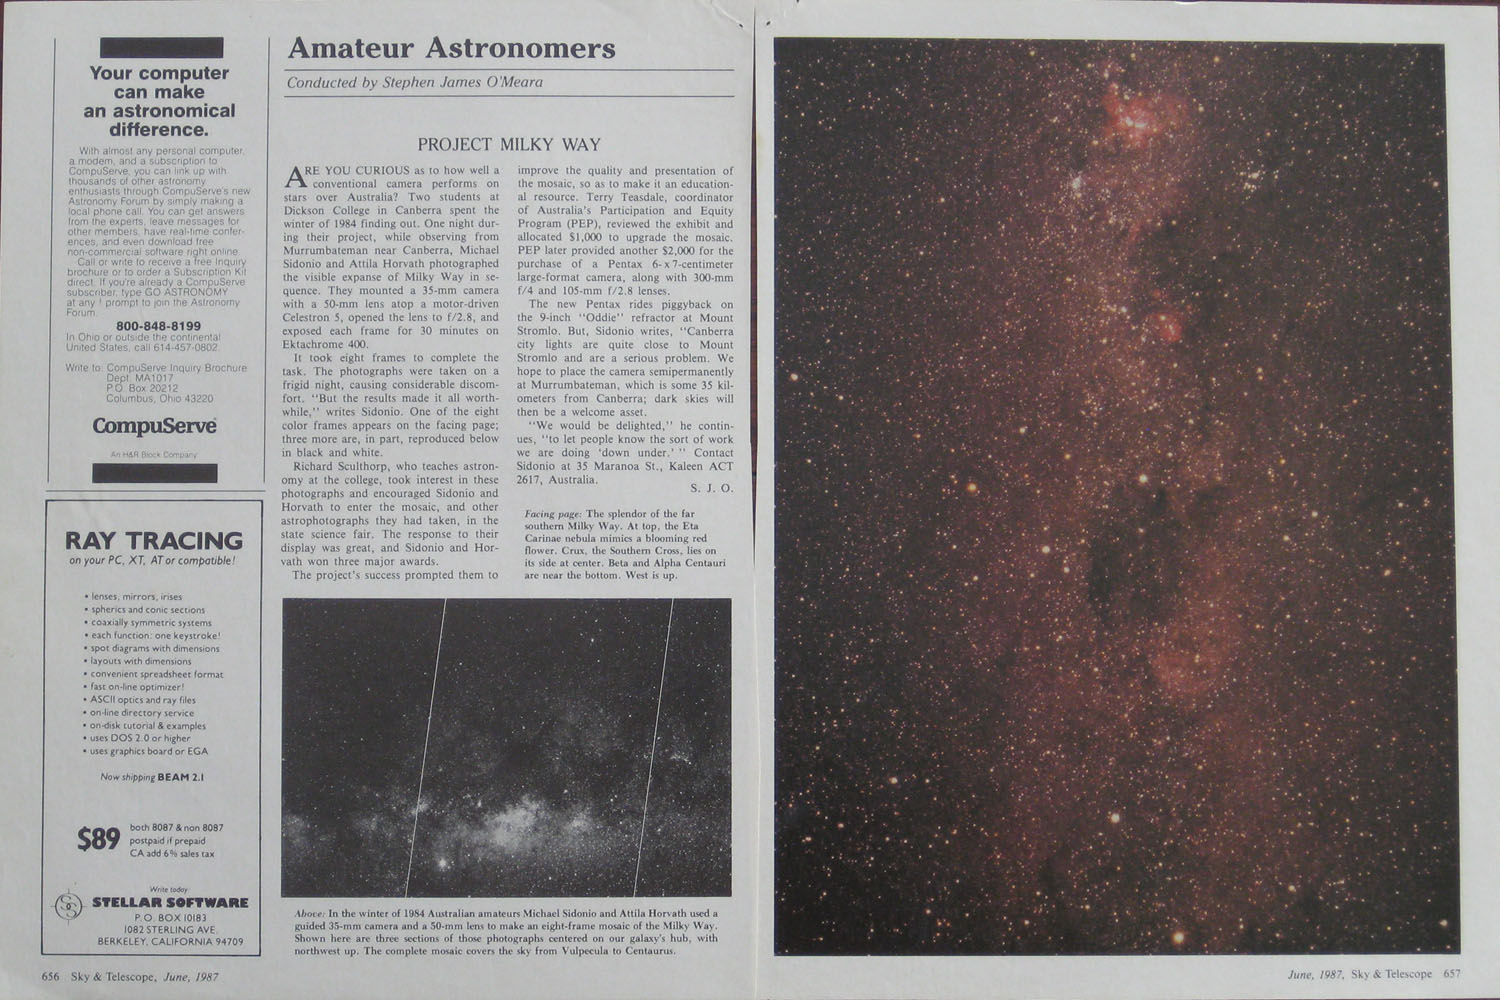 Very first publication in US Sky & Telescope 1987